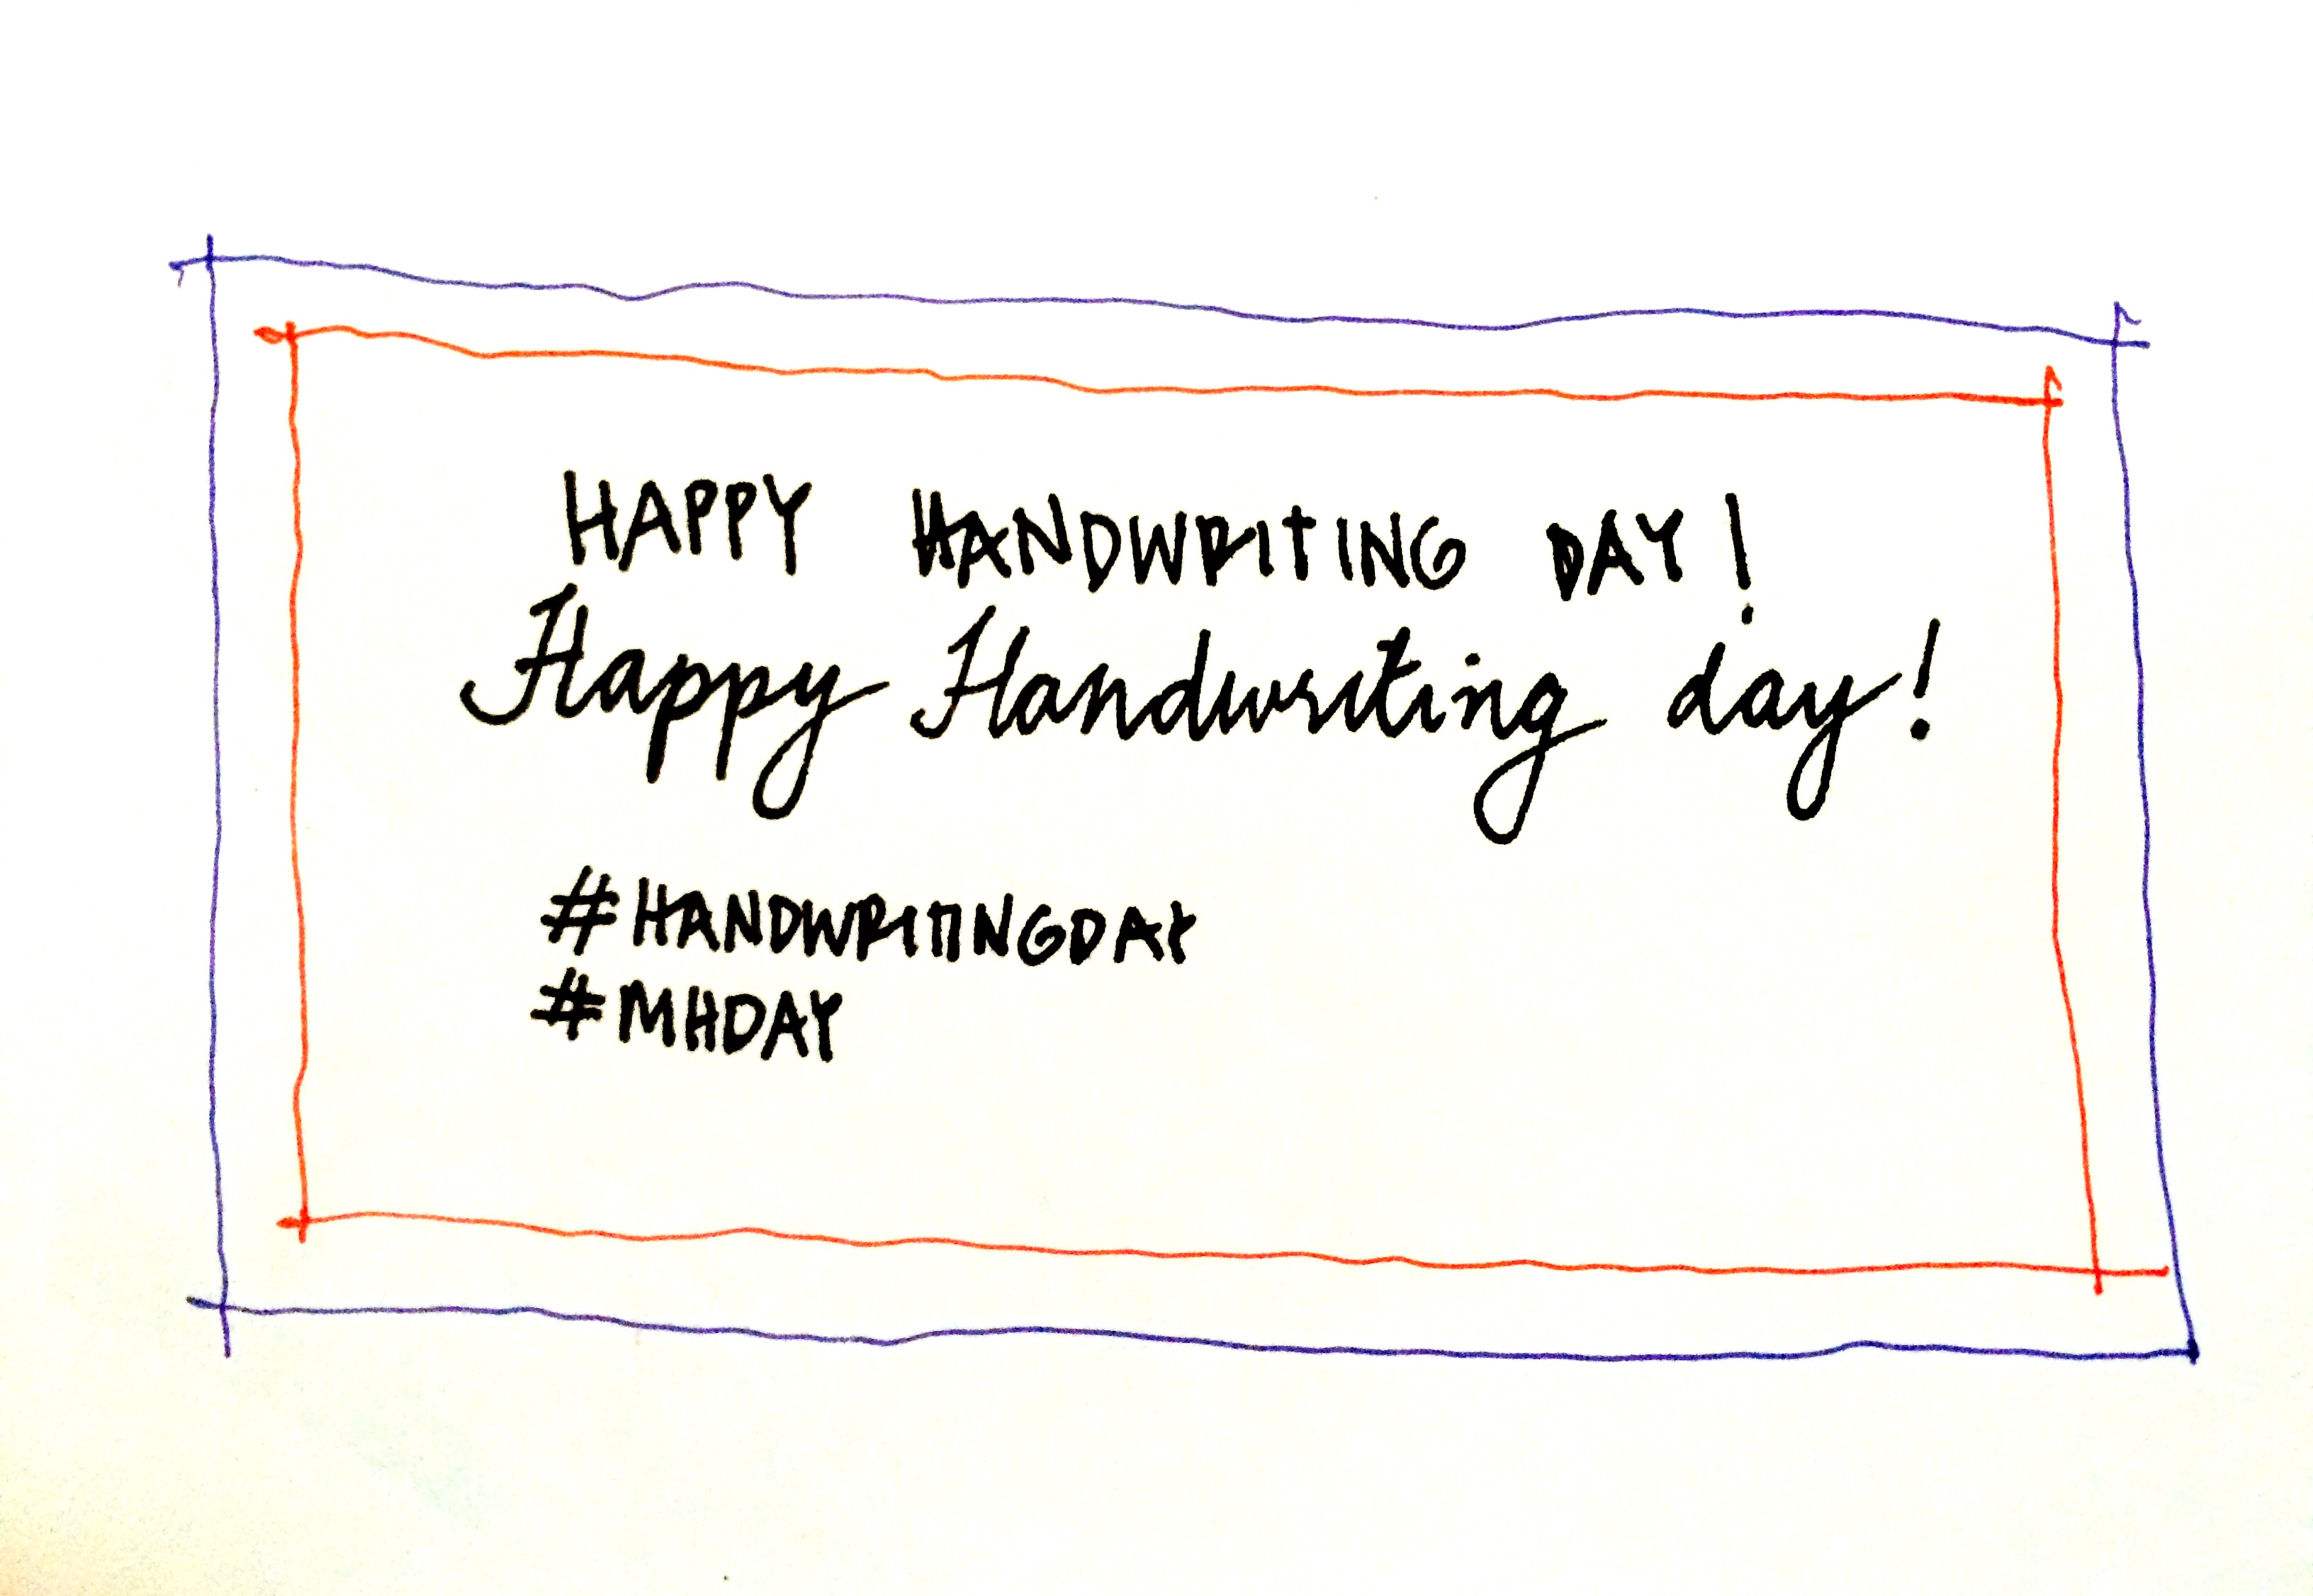 Handwriting is your own personalized font